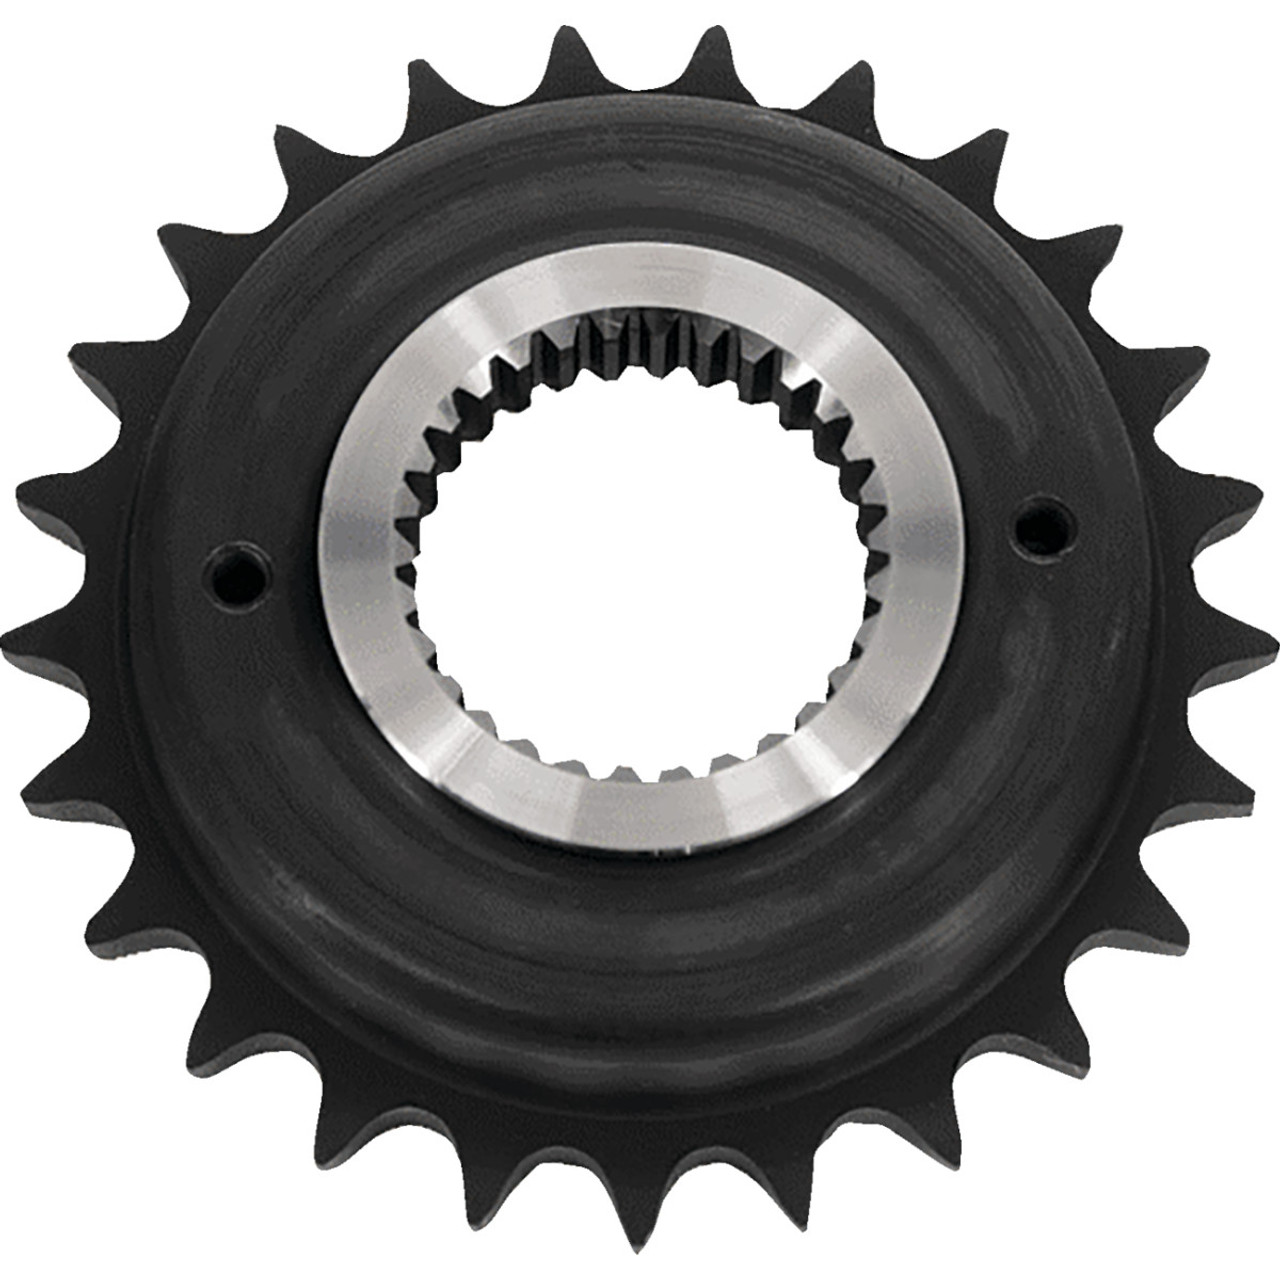 Trask #TM-2901-6 - Front Sprocket - 25 Tooth - Cush Drive